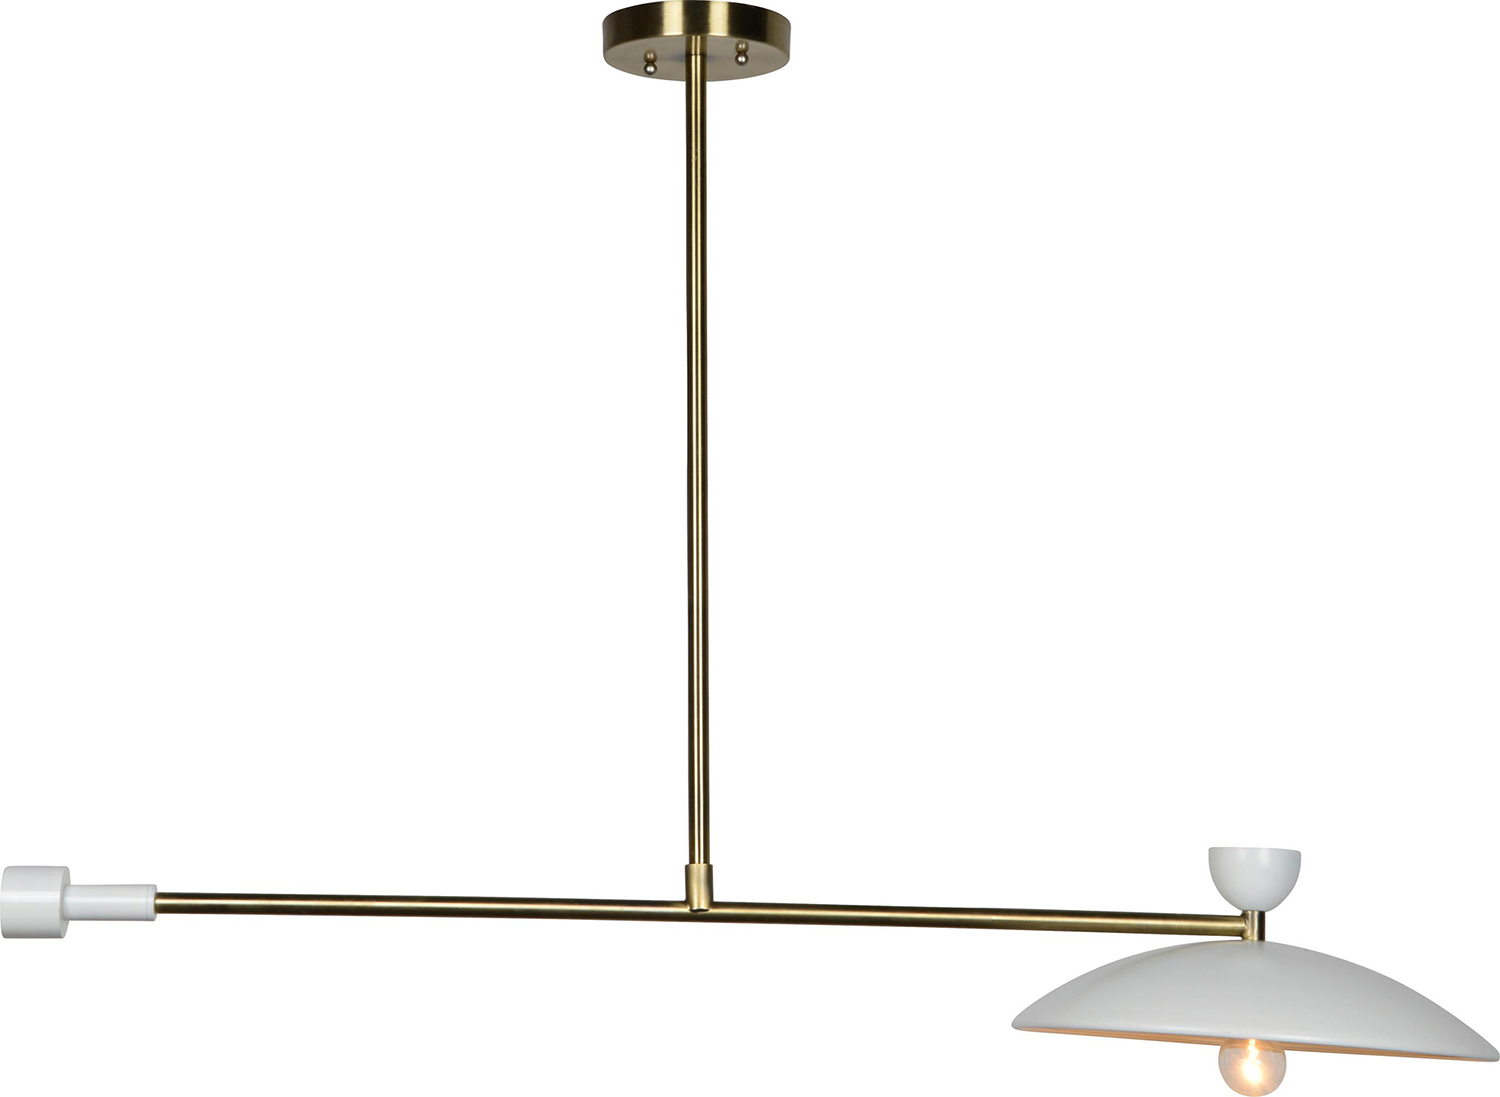 Ren-Wil Helical Ceiling Fixture - Polished Brass